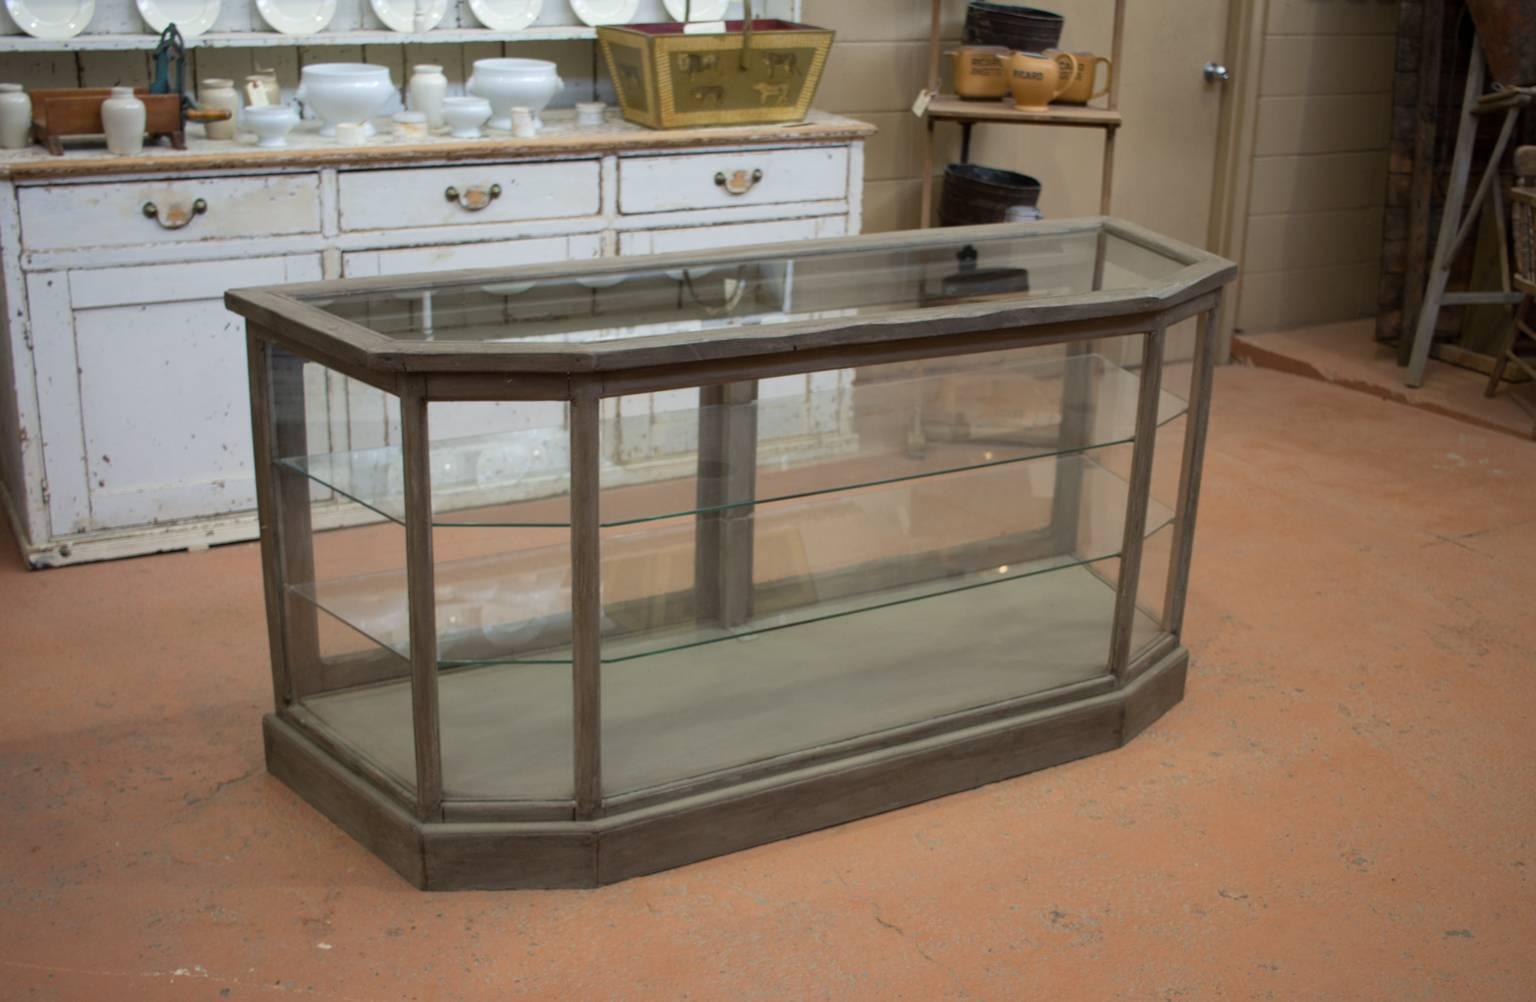 Vintage French shop vitrine or display case with two glass shelves.